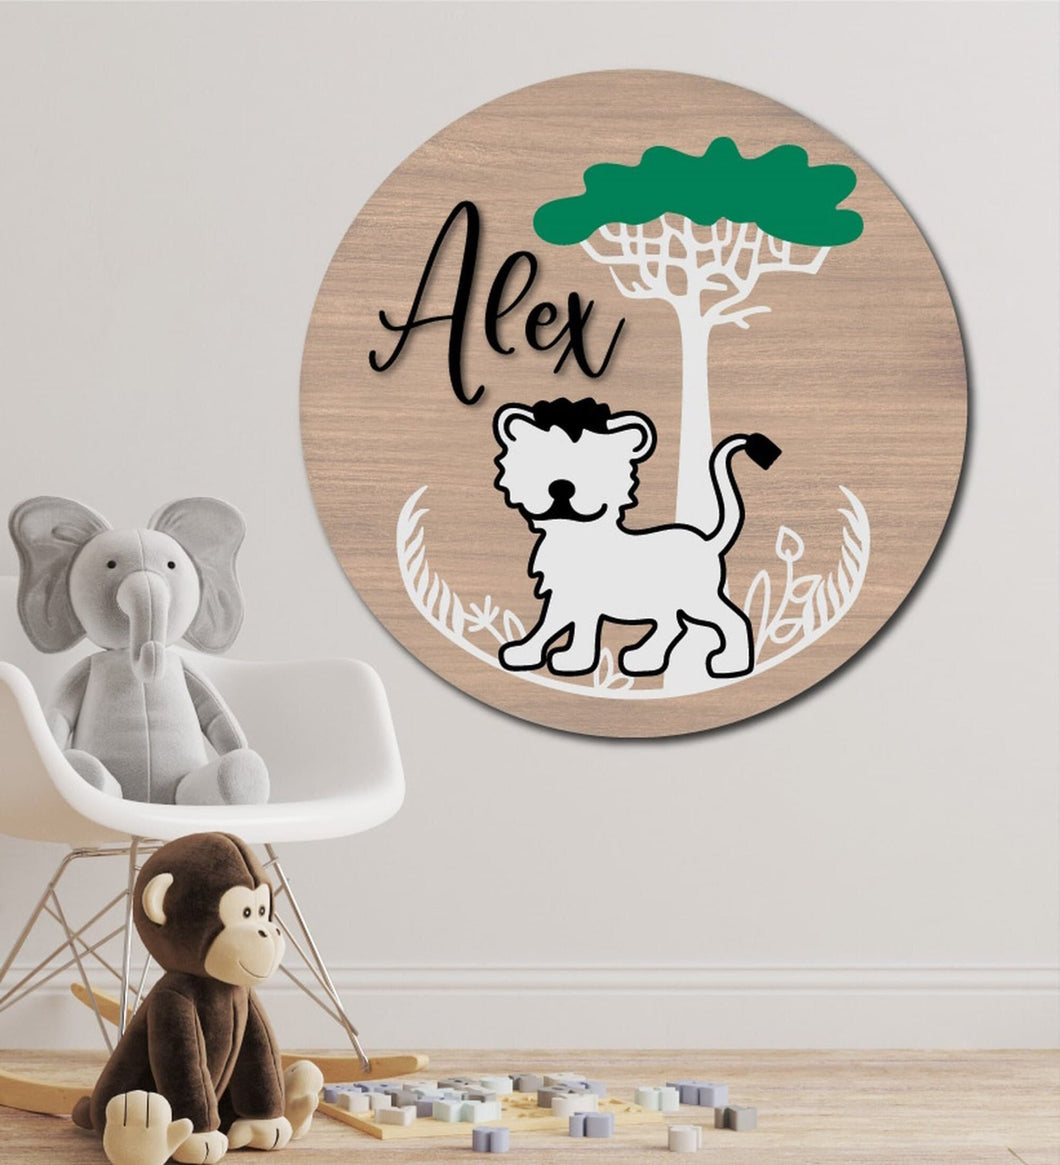 Super Cute Personalized Jungle Wall Hanging for Nursery or Childs Room home decor kid's room decor nursery decor